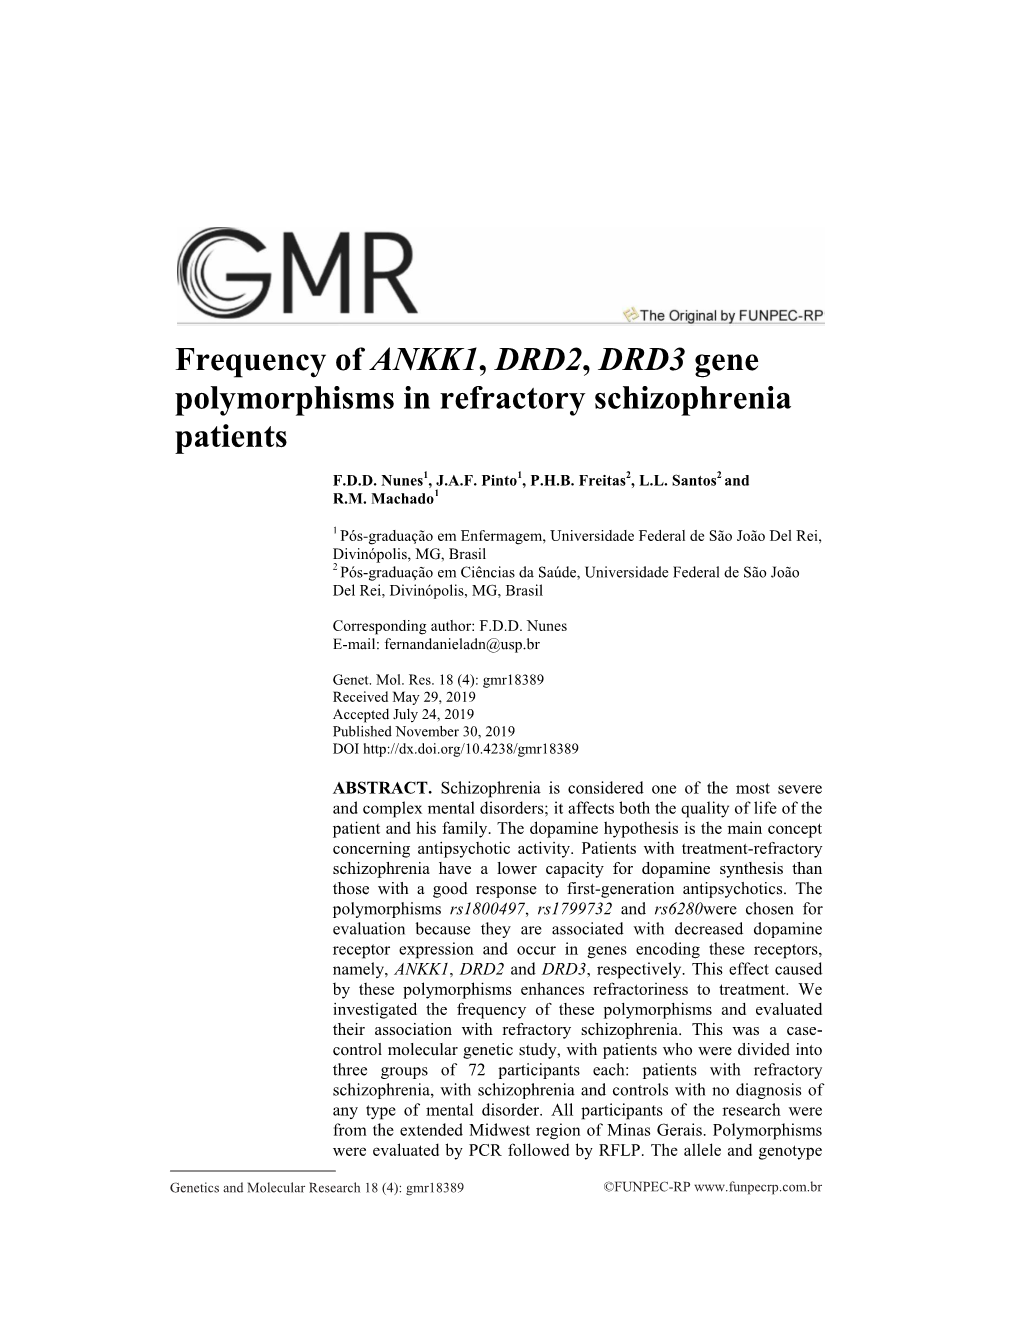 Frequency of ANKK1, DRD2, DRD3 Gene Polymorphisms in Refractory Schizophrenia Patients